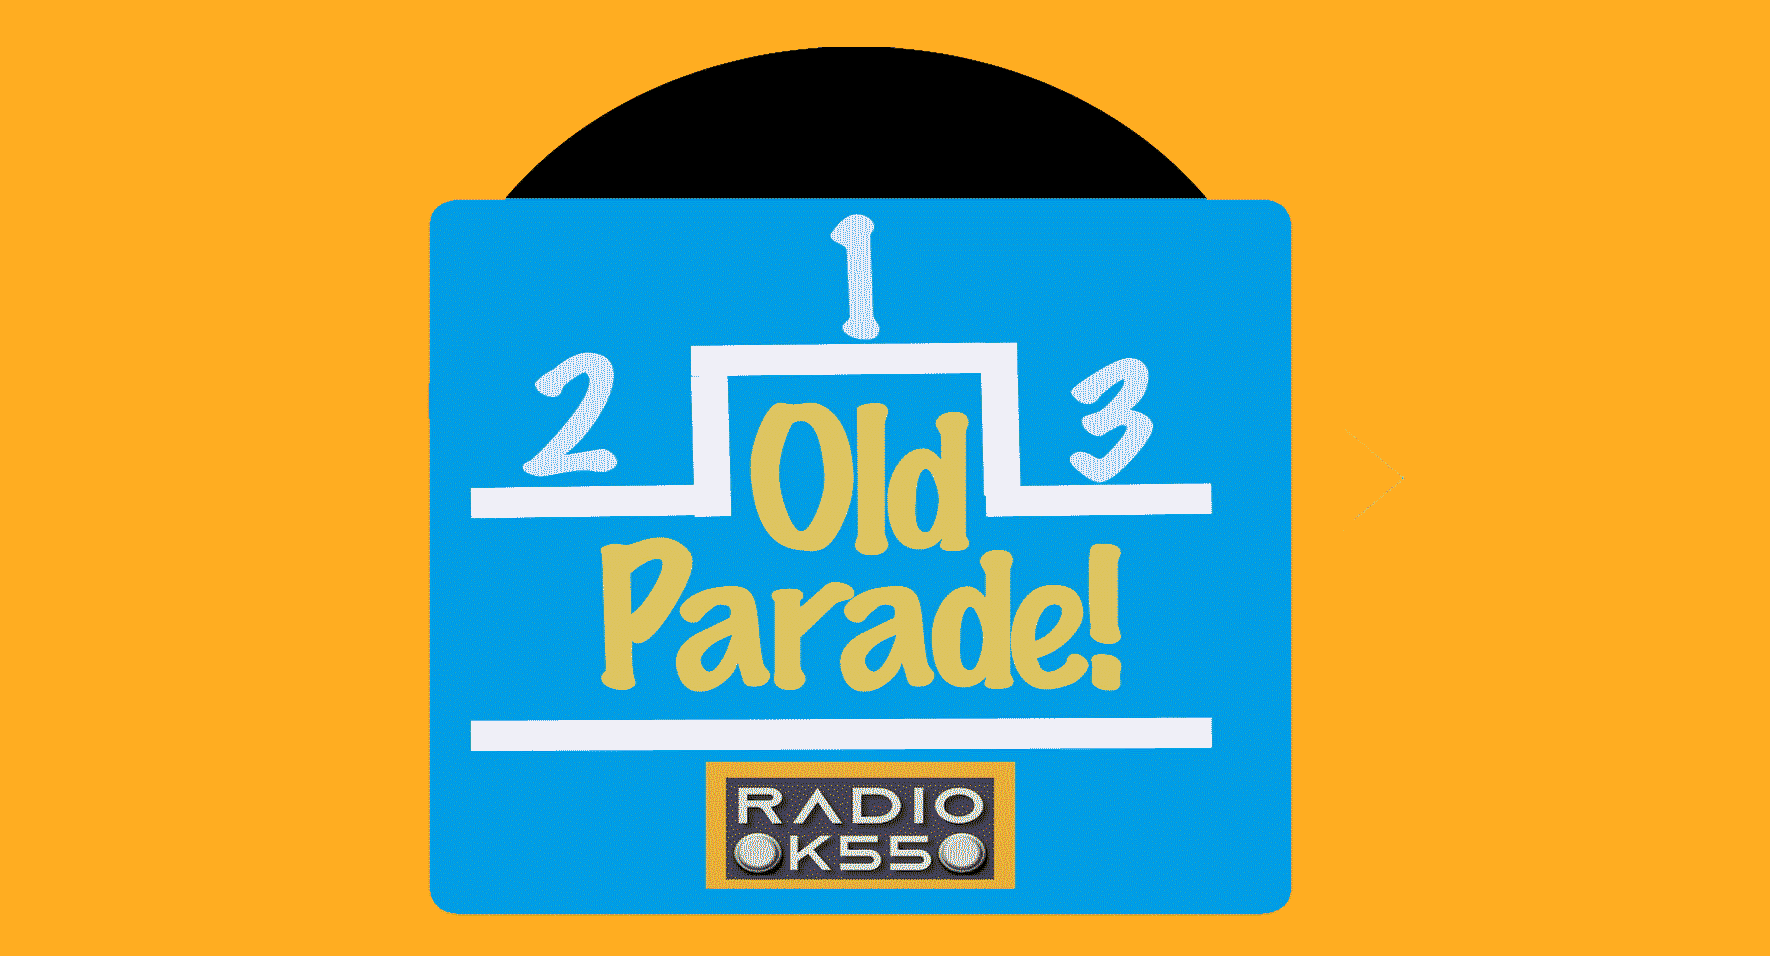 Old Parade